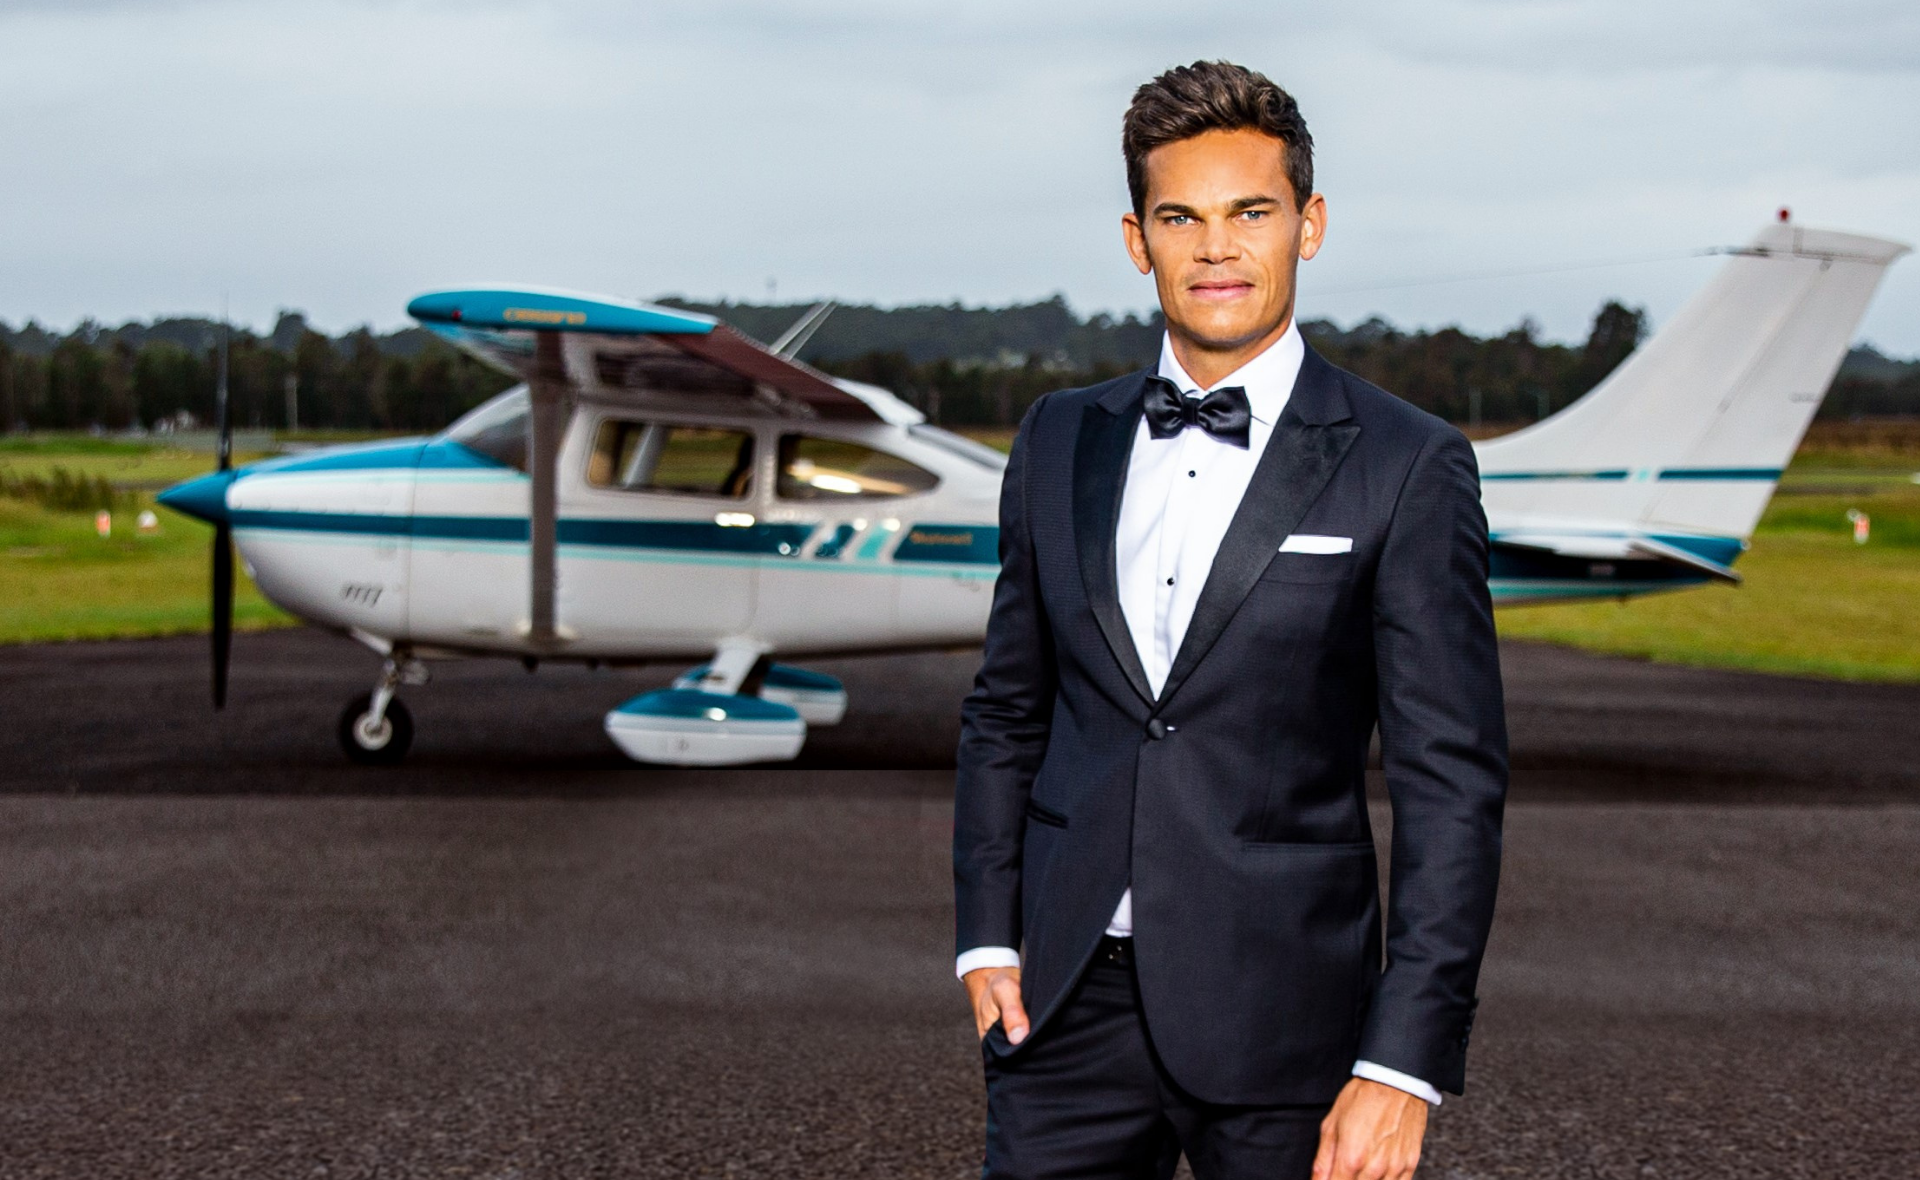 Grab the roses! The Bachelor Australia for 2021 has been revealed, and he’s an everyday bloke